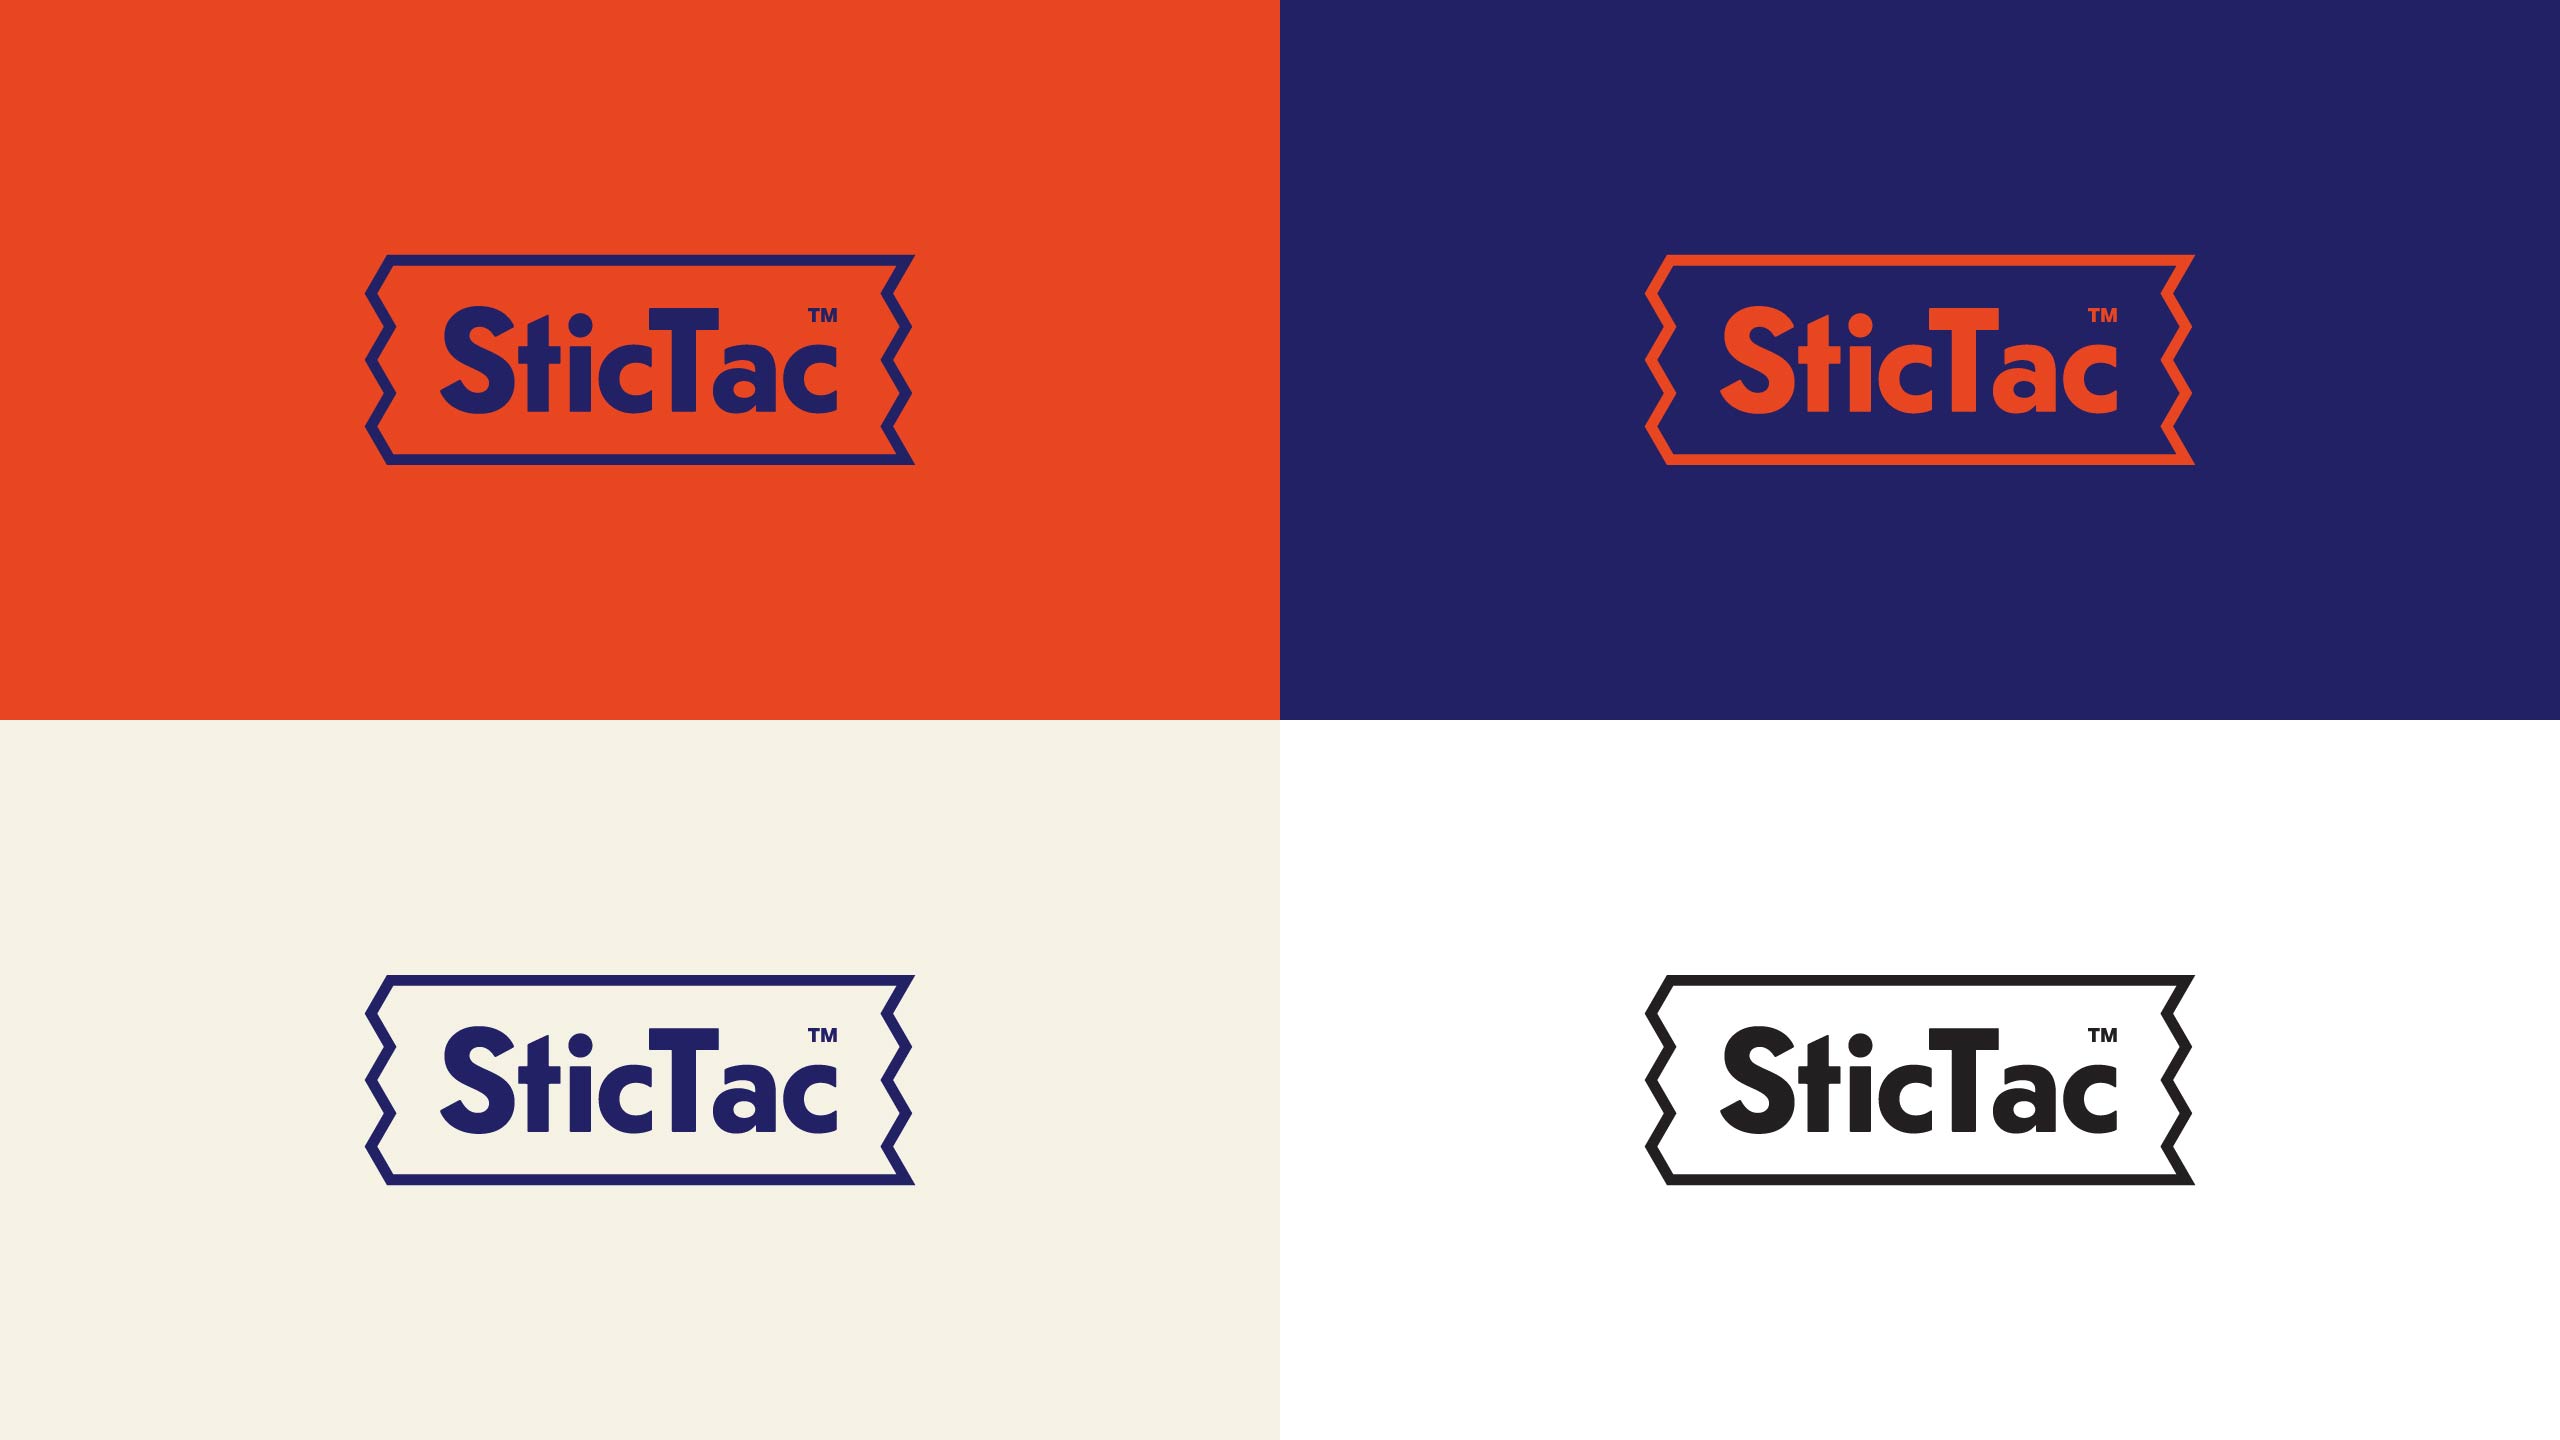 The SticTac logo uses a shape that looks like tape with torn edges in different colorways